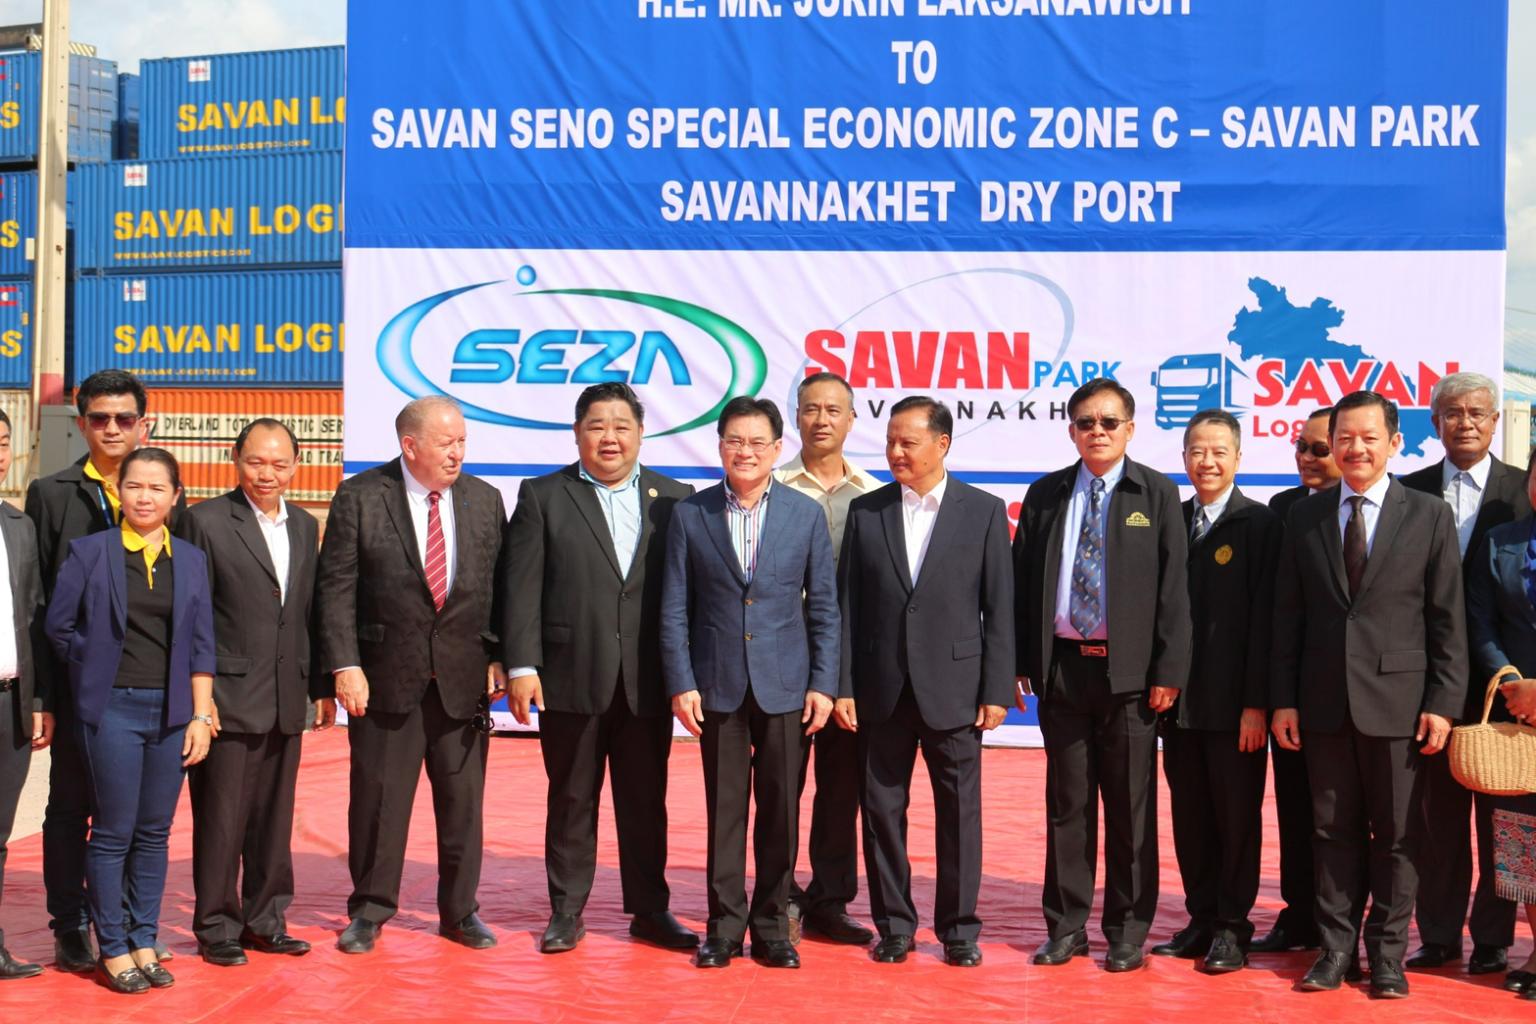 The Vice Prime Minister of Thailand Visited Savan Logistics Dry Port